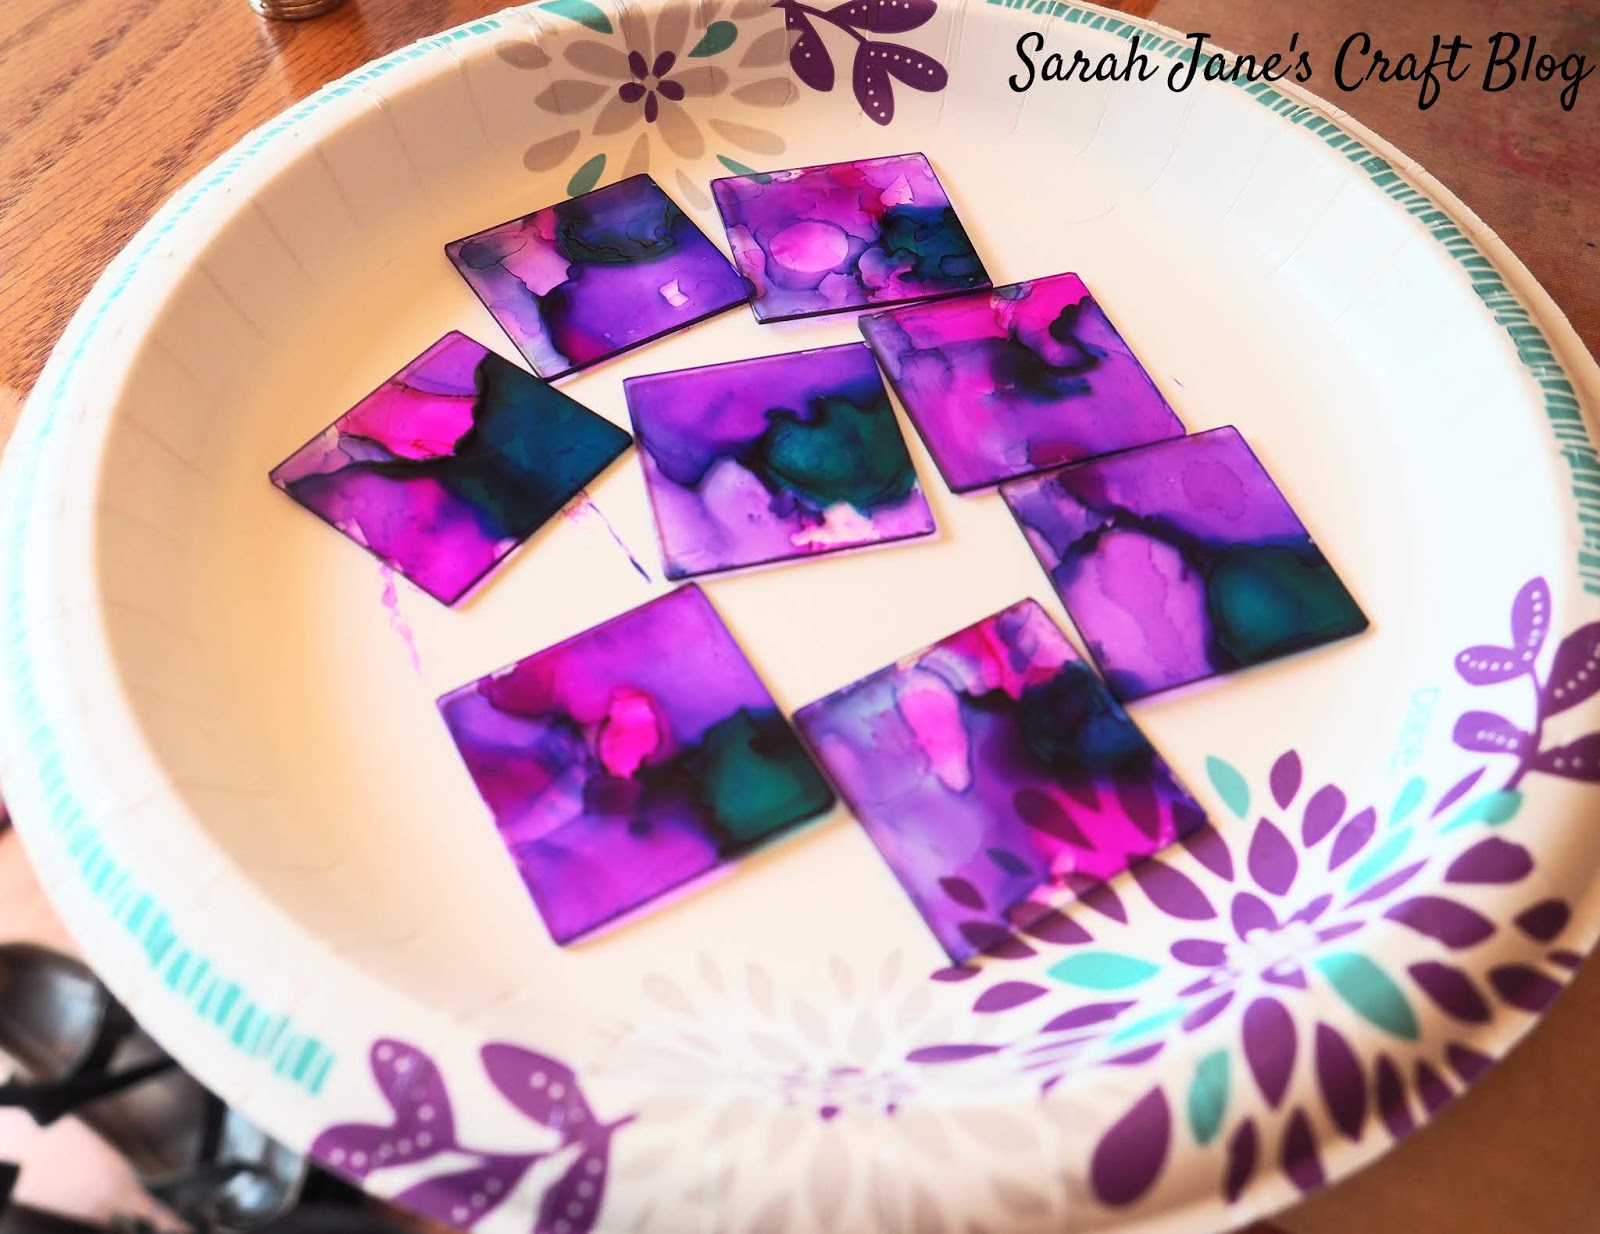 Alcohol Ink on Glass Sealant Test